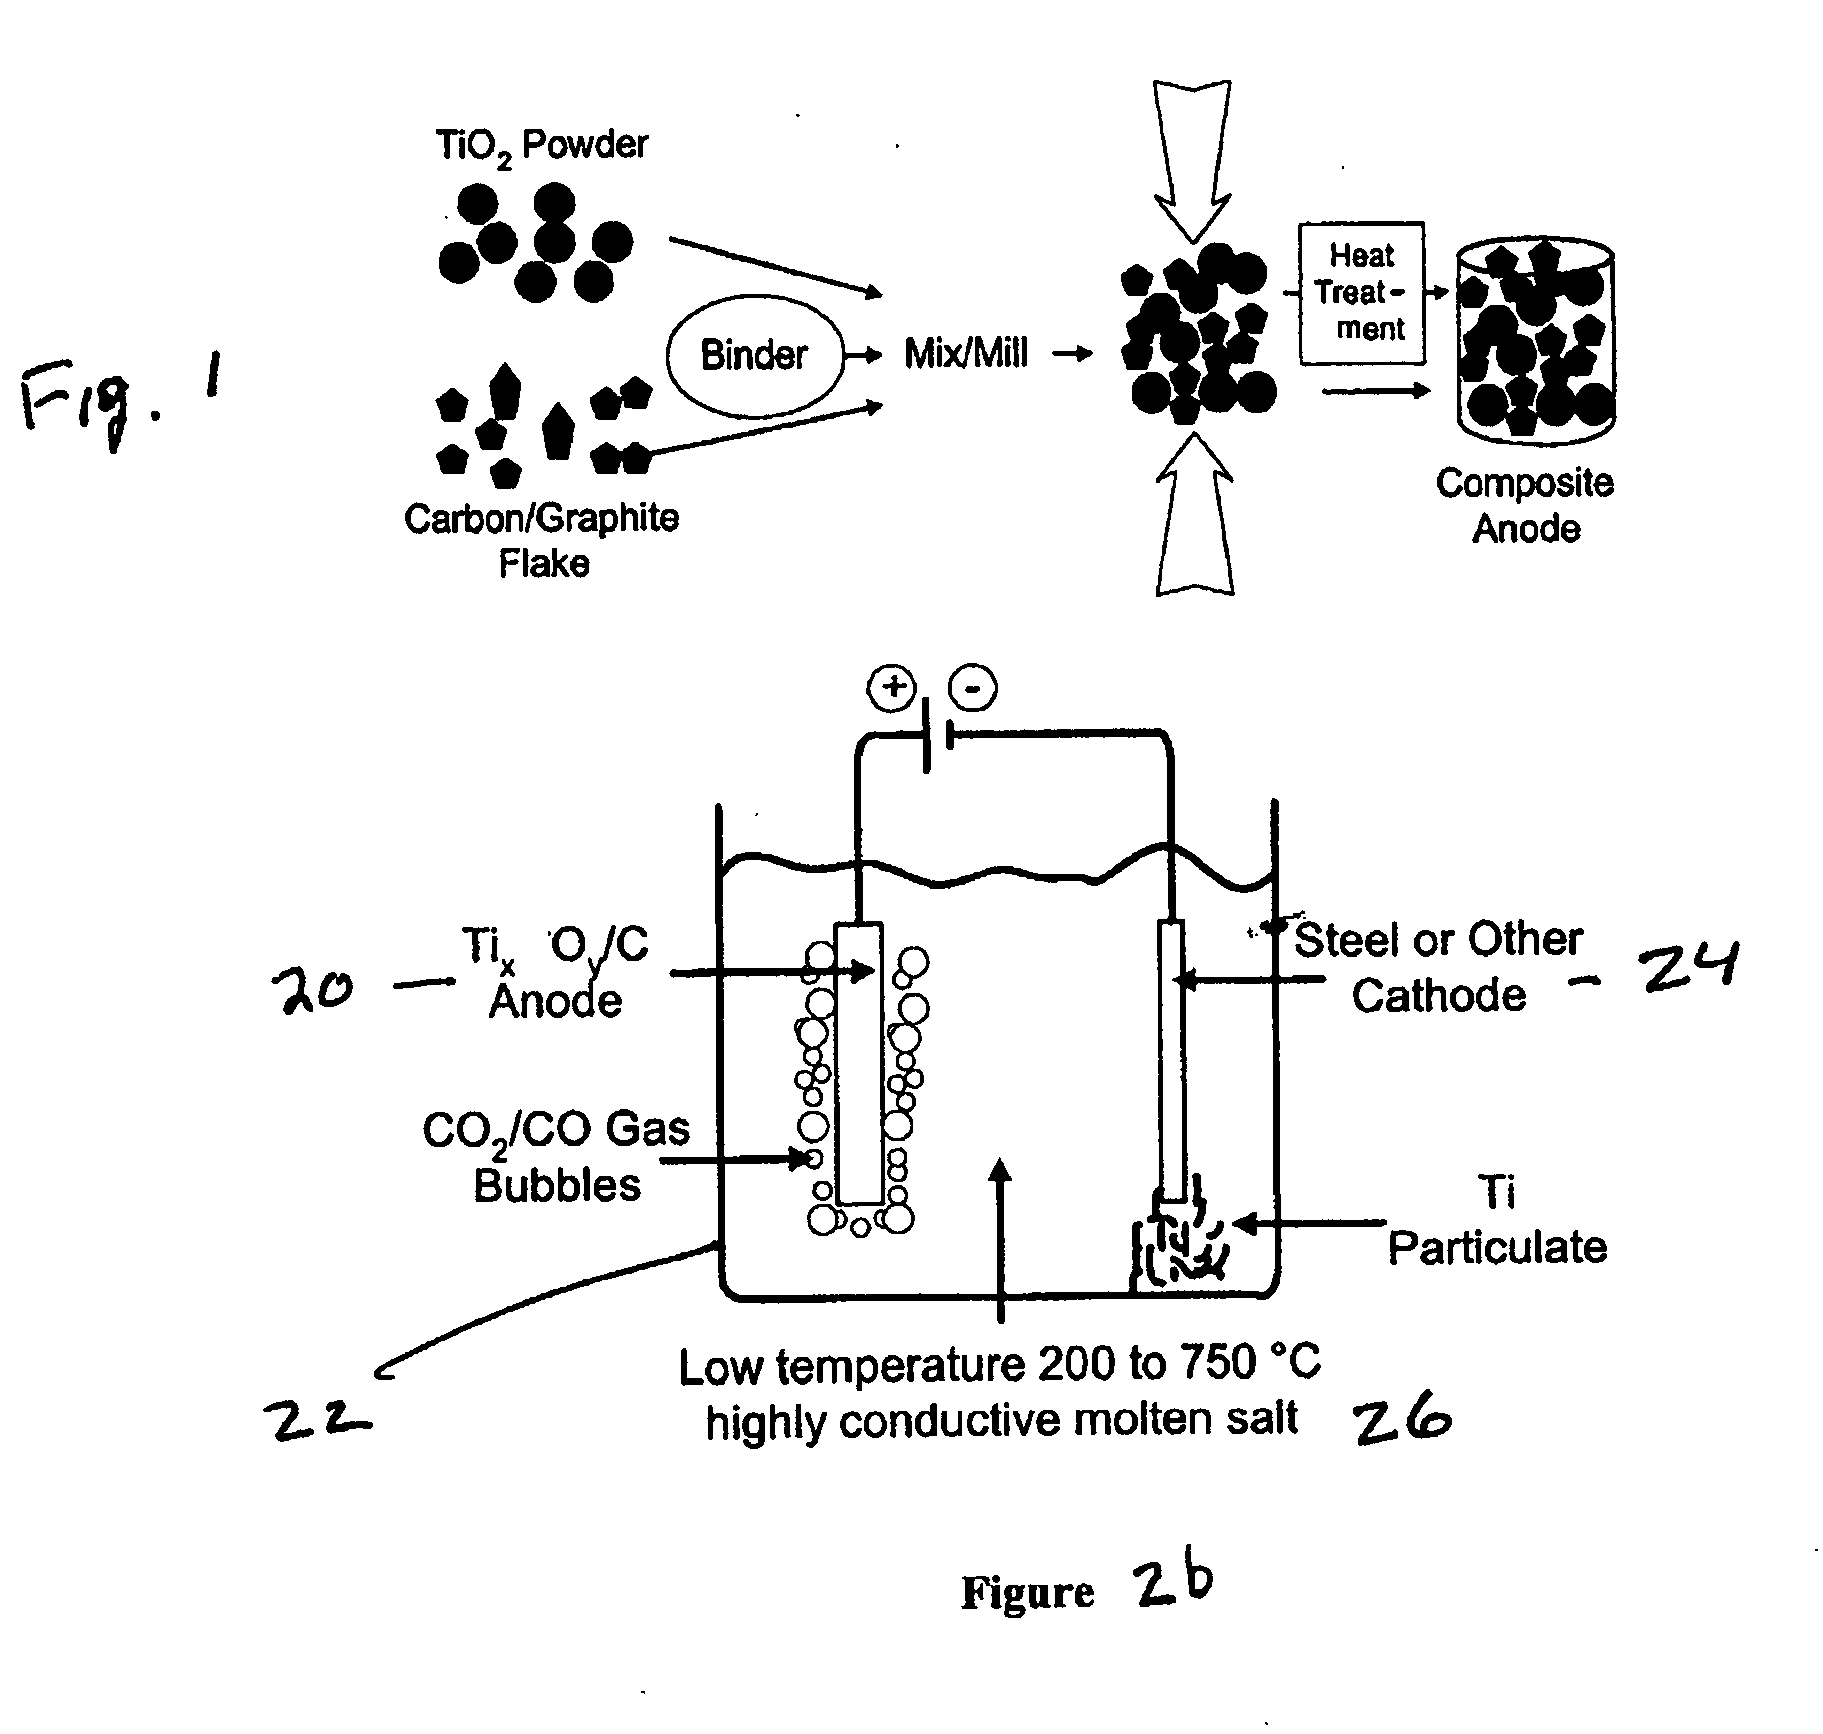 Thermal and electrochemical process for metal production